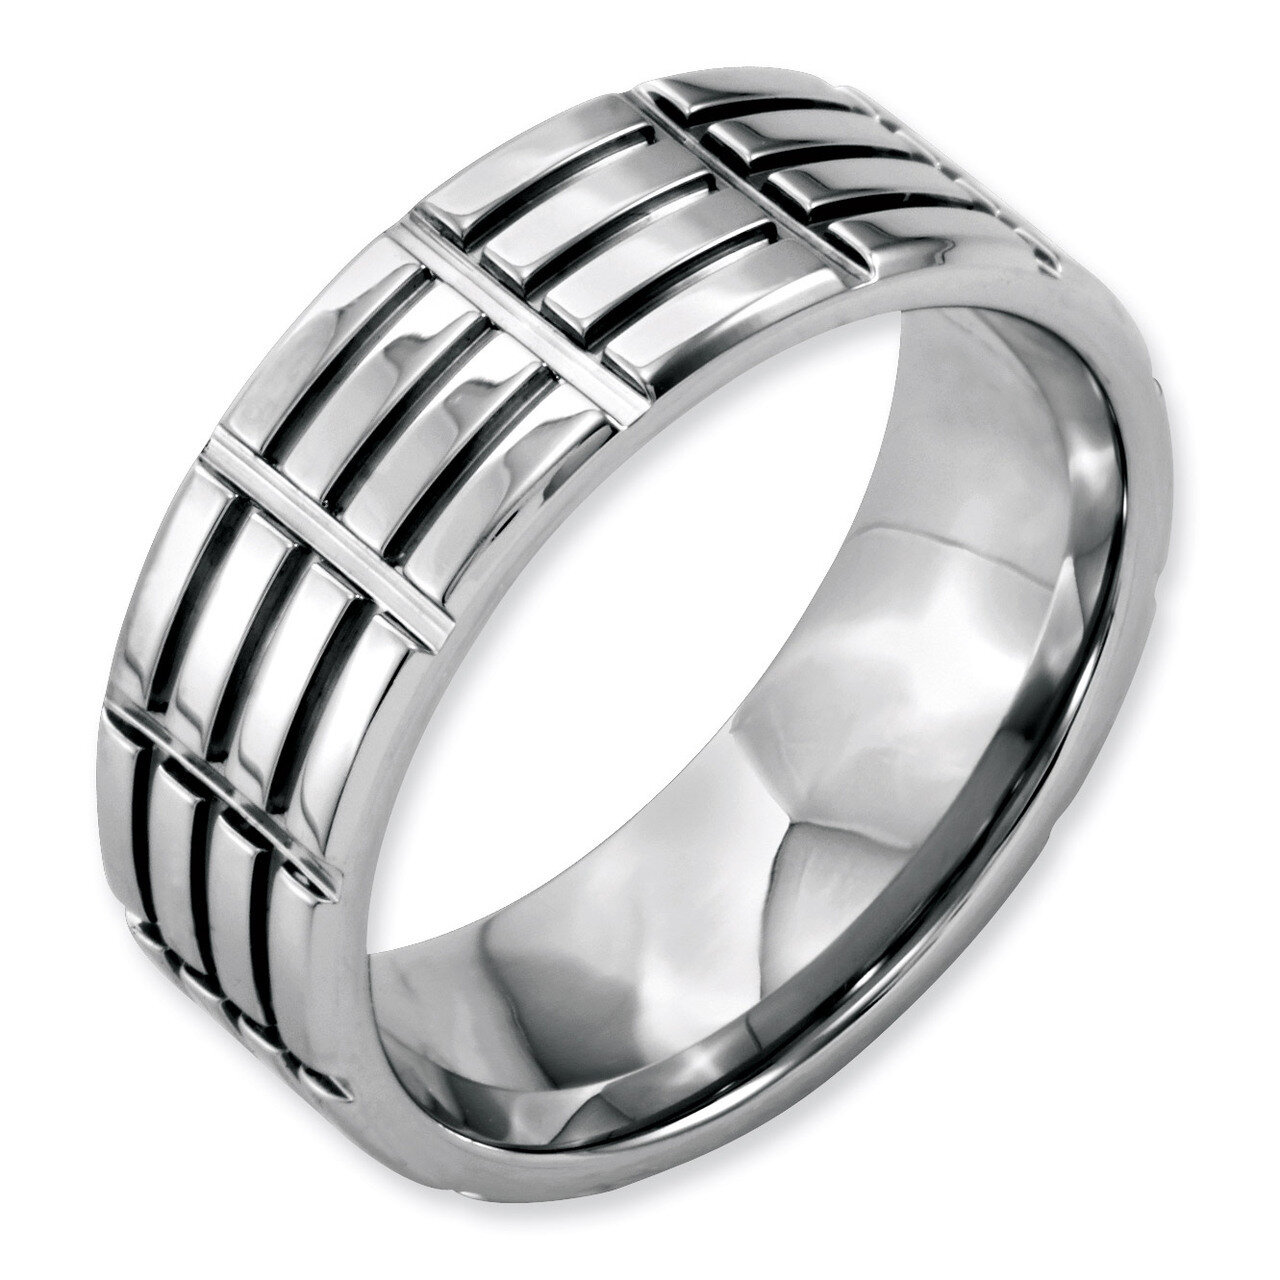 8mm Grooved Polished Band - Stainless Steel SR161